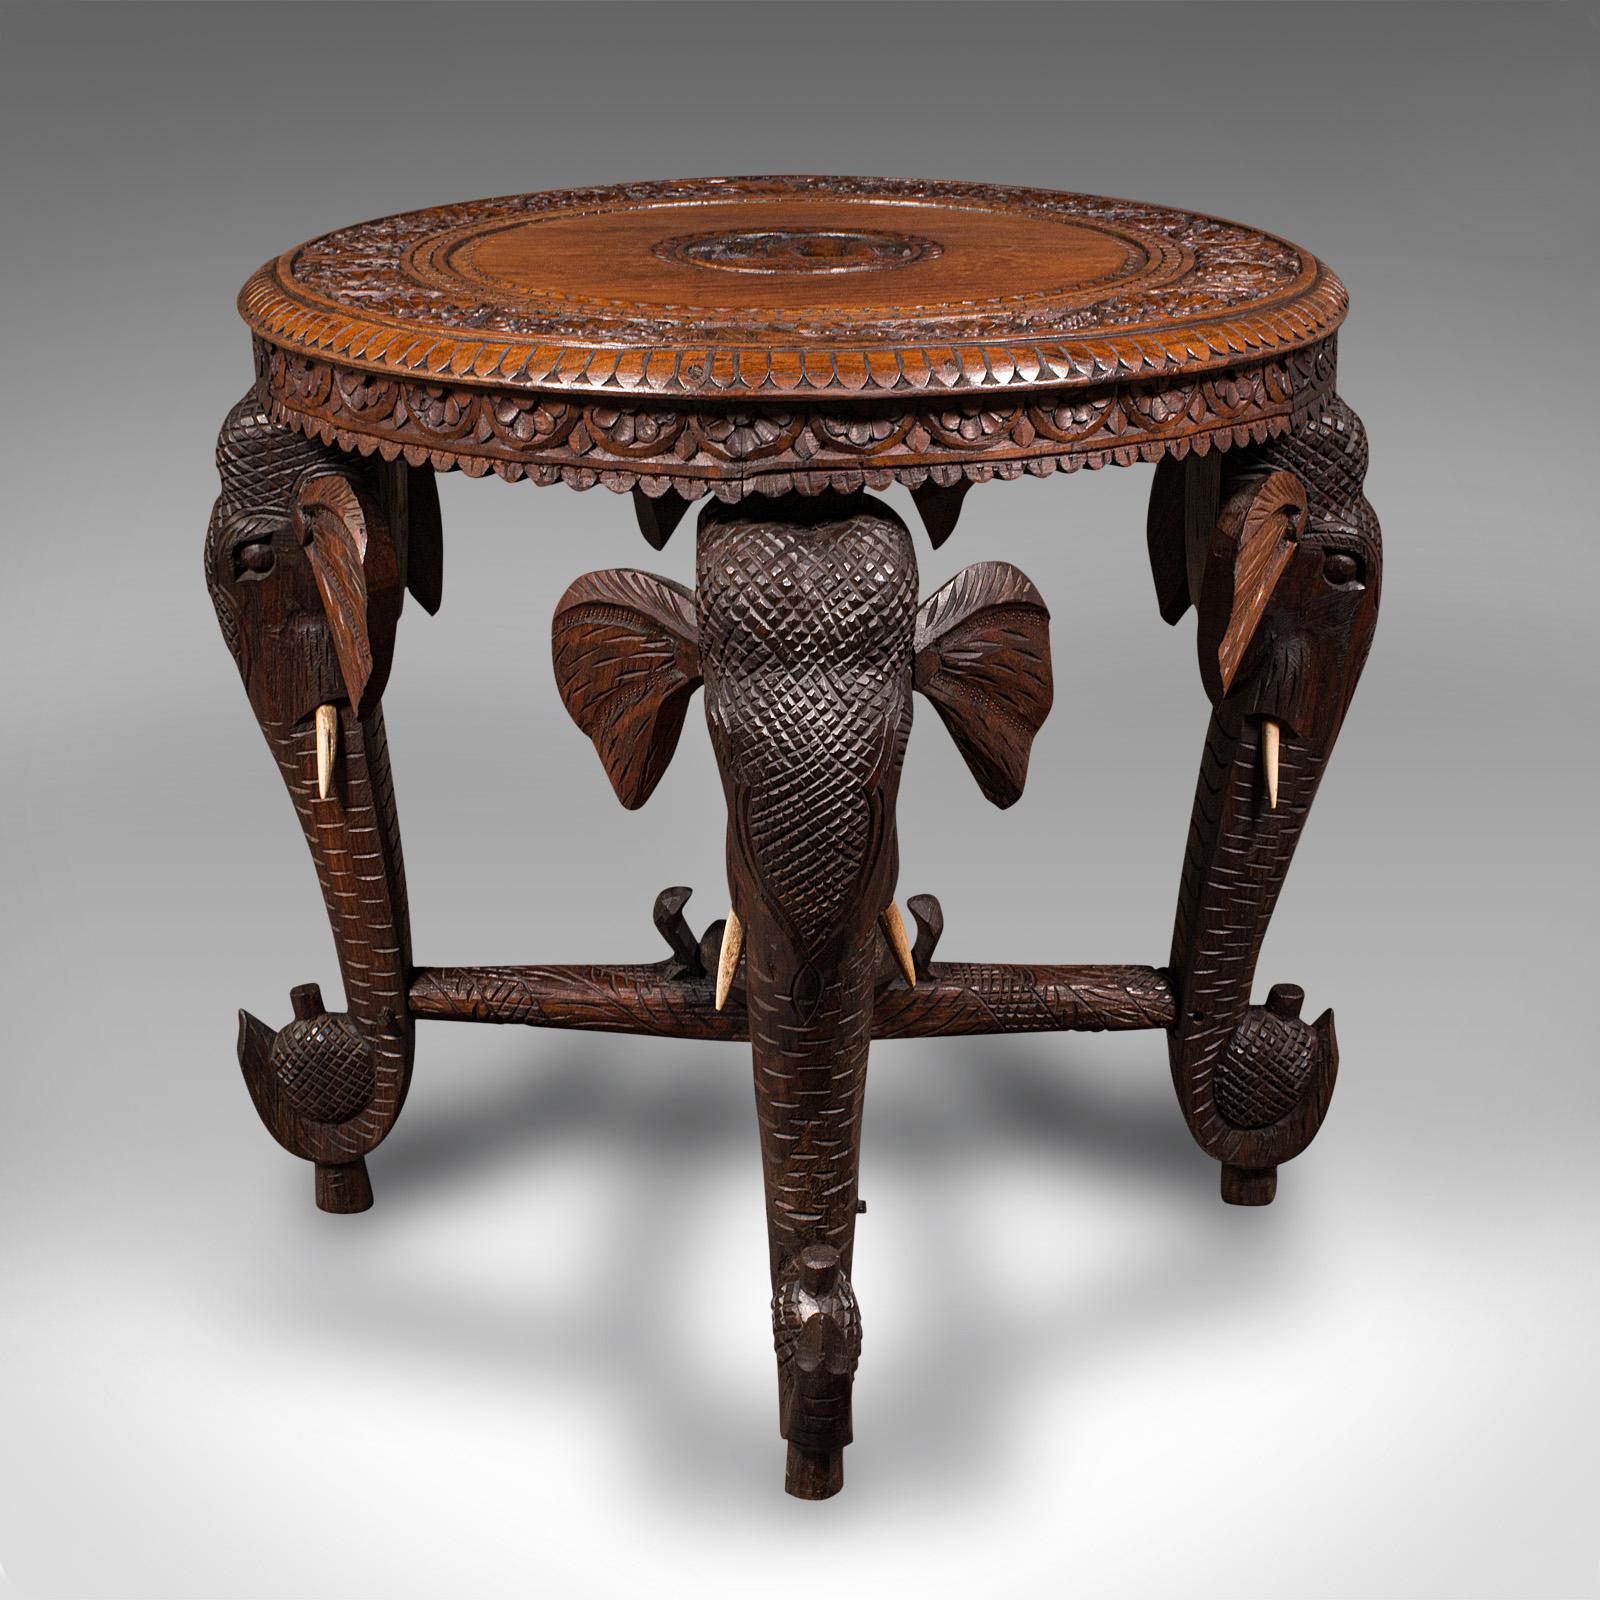 This is an antique occasional table. An Indian, solid teak carved coffee table with Elephant masks, dating to the late Victorian period, circa 1900.

Striking craftsmanship with superb decorative appeal
Displays a desirable aged patina and in good